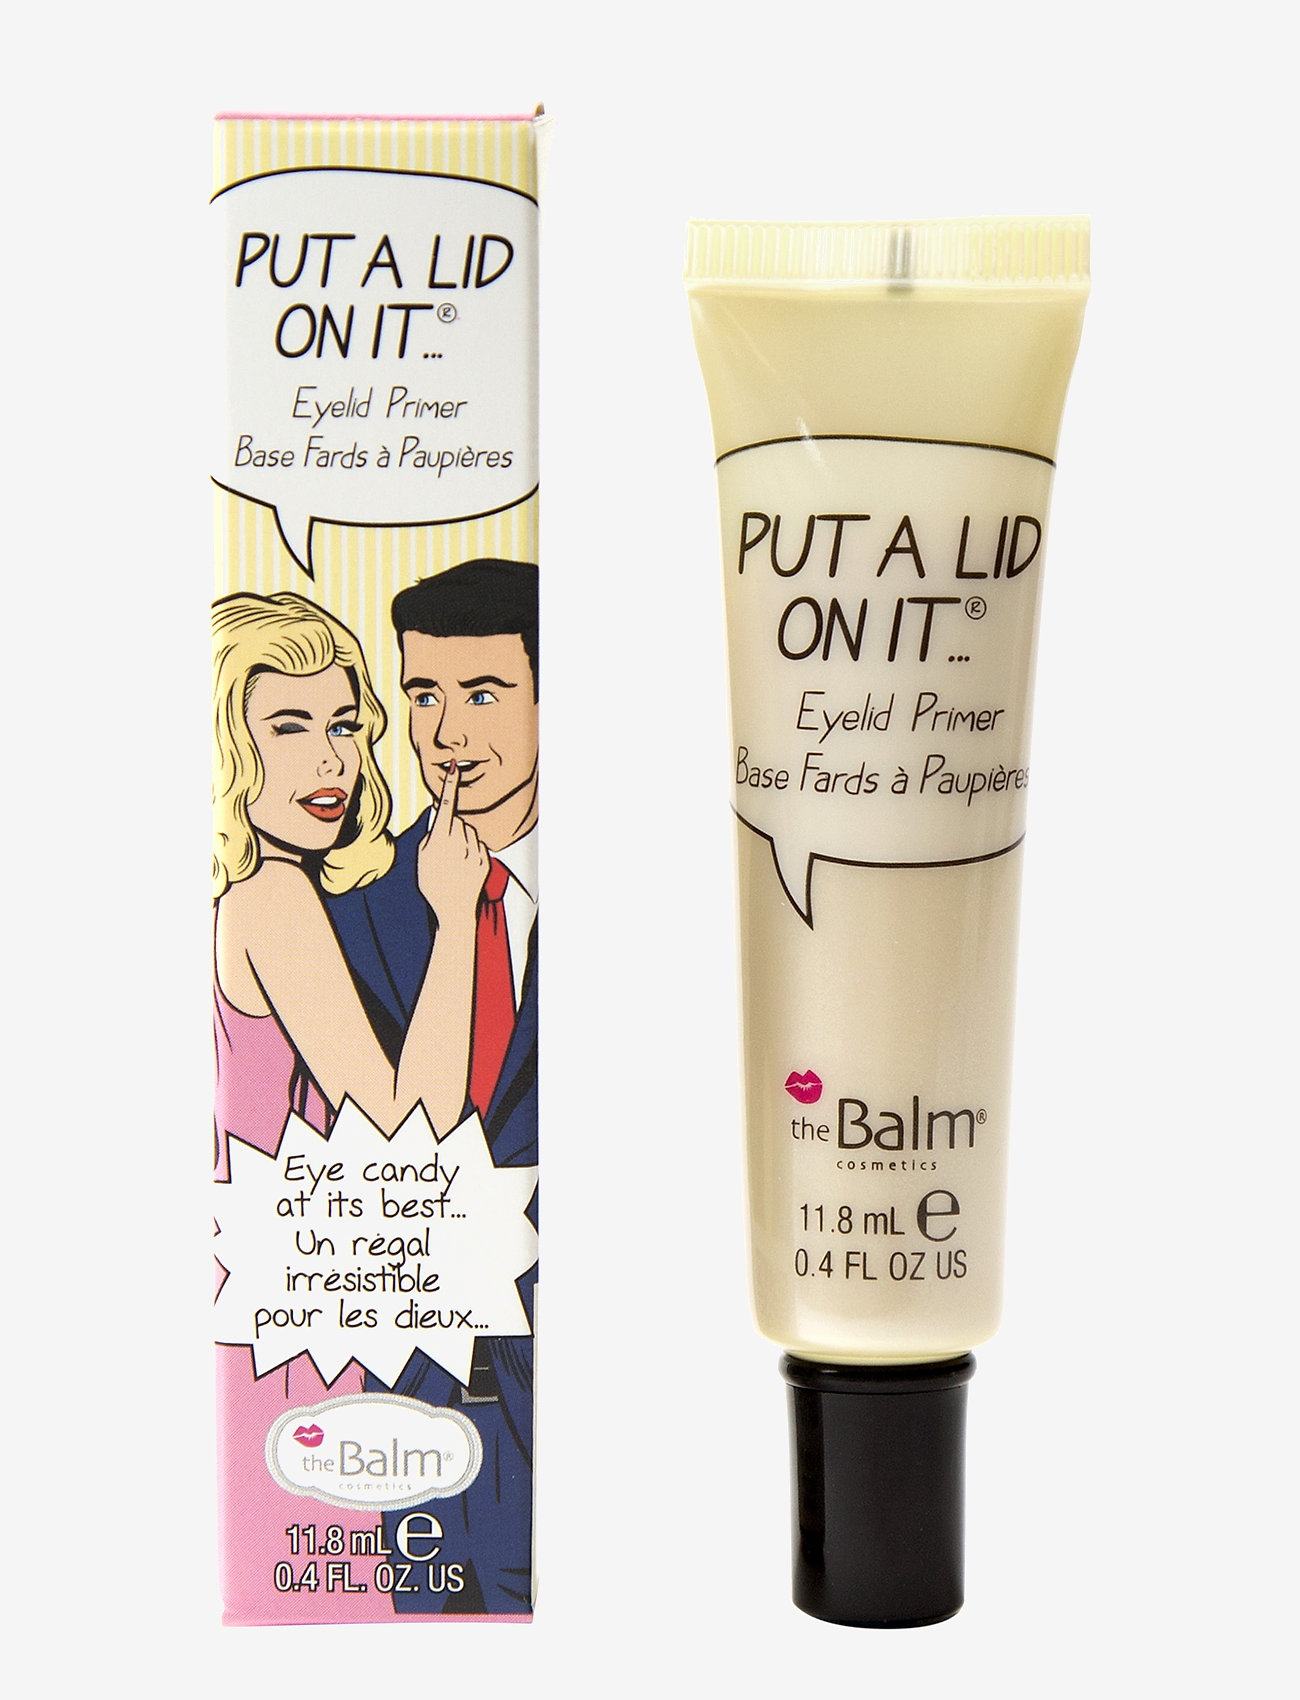 The Balm - PUT A LID ON IT® Eyelid Primer - juhlamuotia outlet-hintaan - translucent - 1